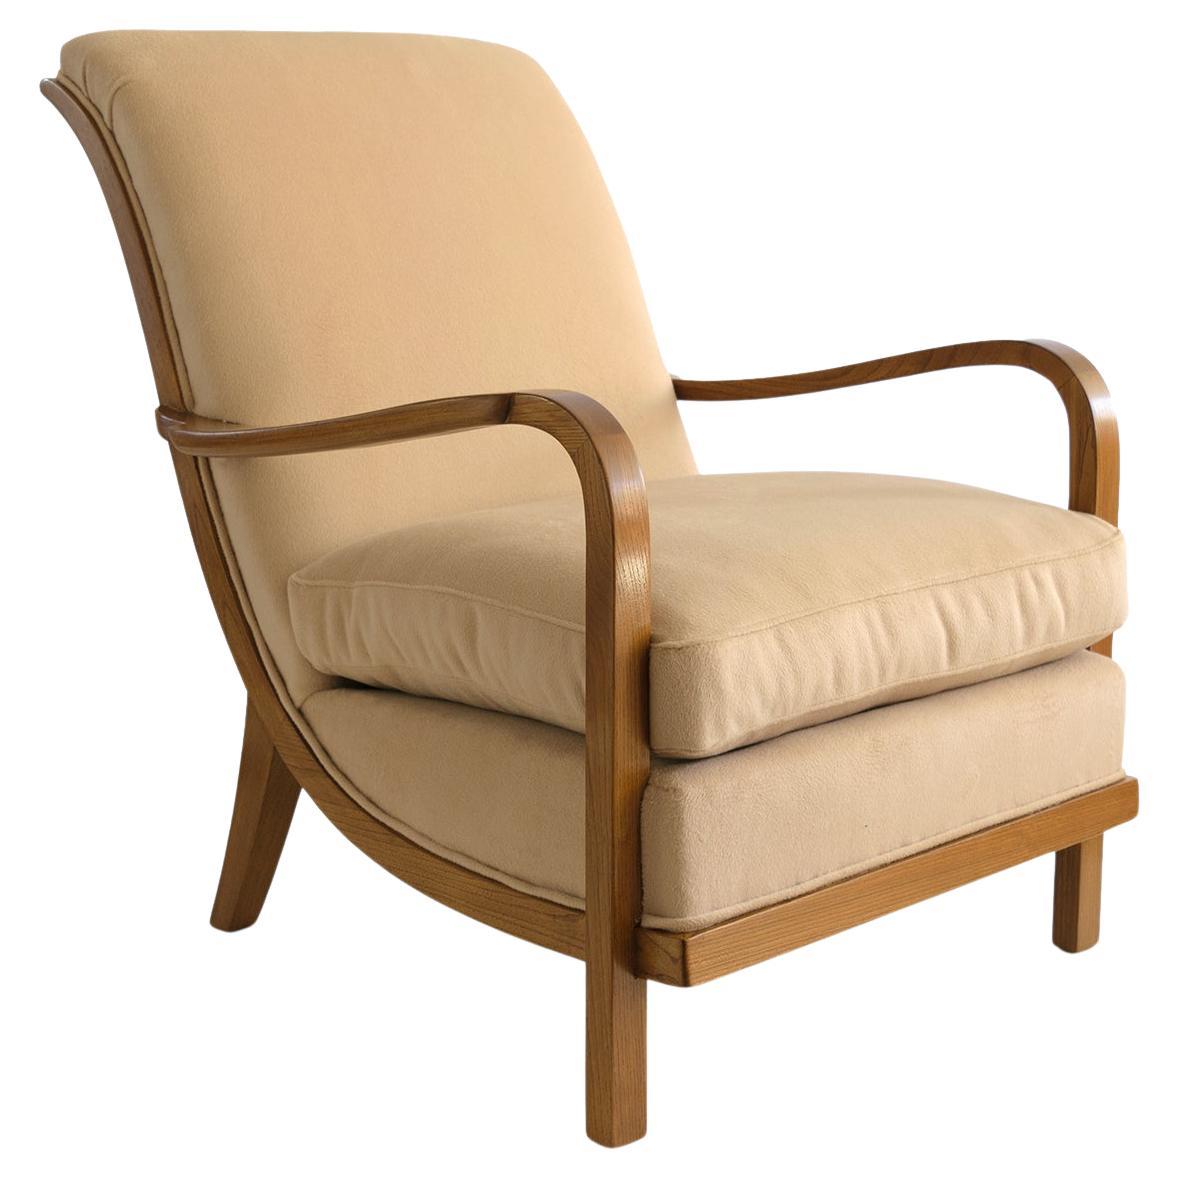 Swedish Art Deco lounge chair by Wilhelm Knoll, Malmo 1933 For Sale